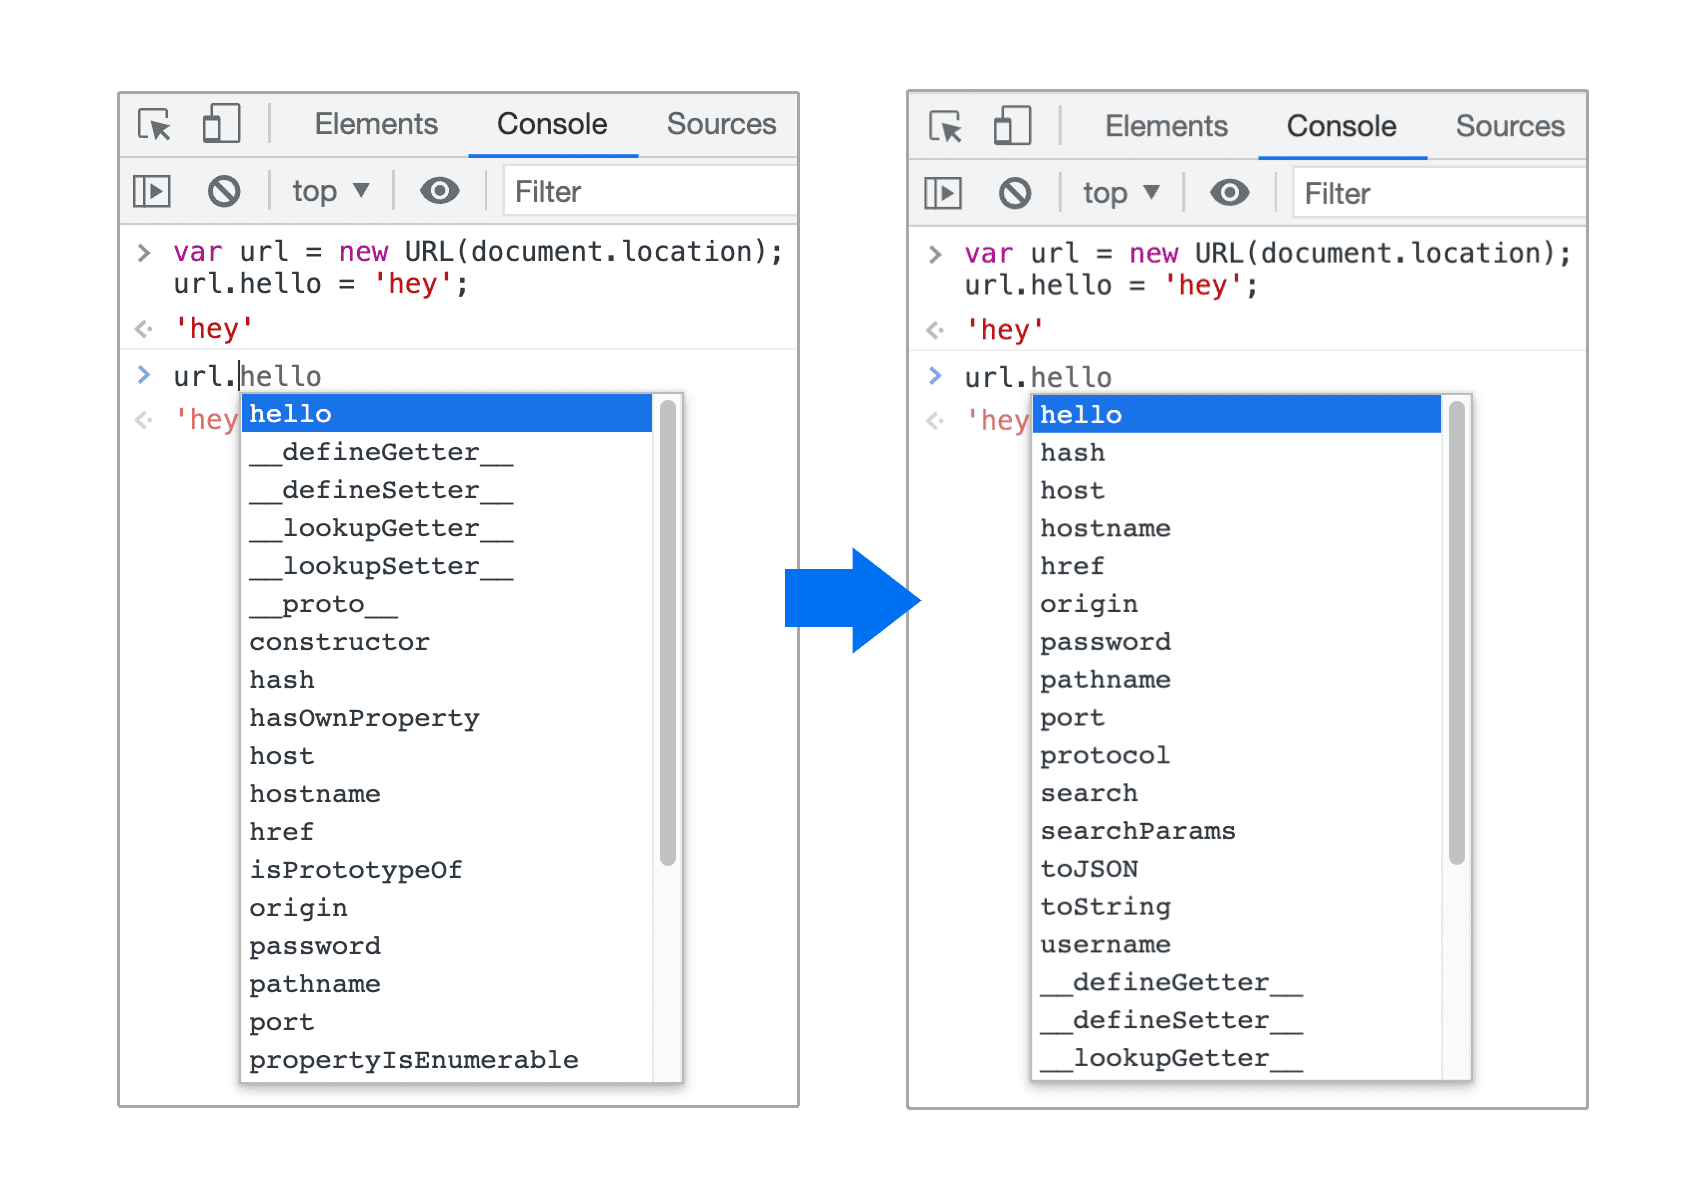 Improved autocomplete suggestions for JavaScript objects